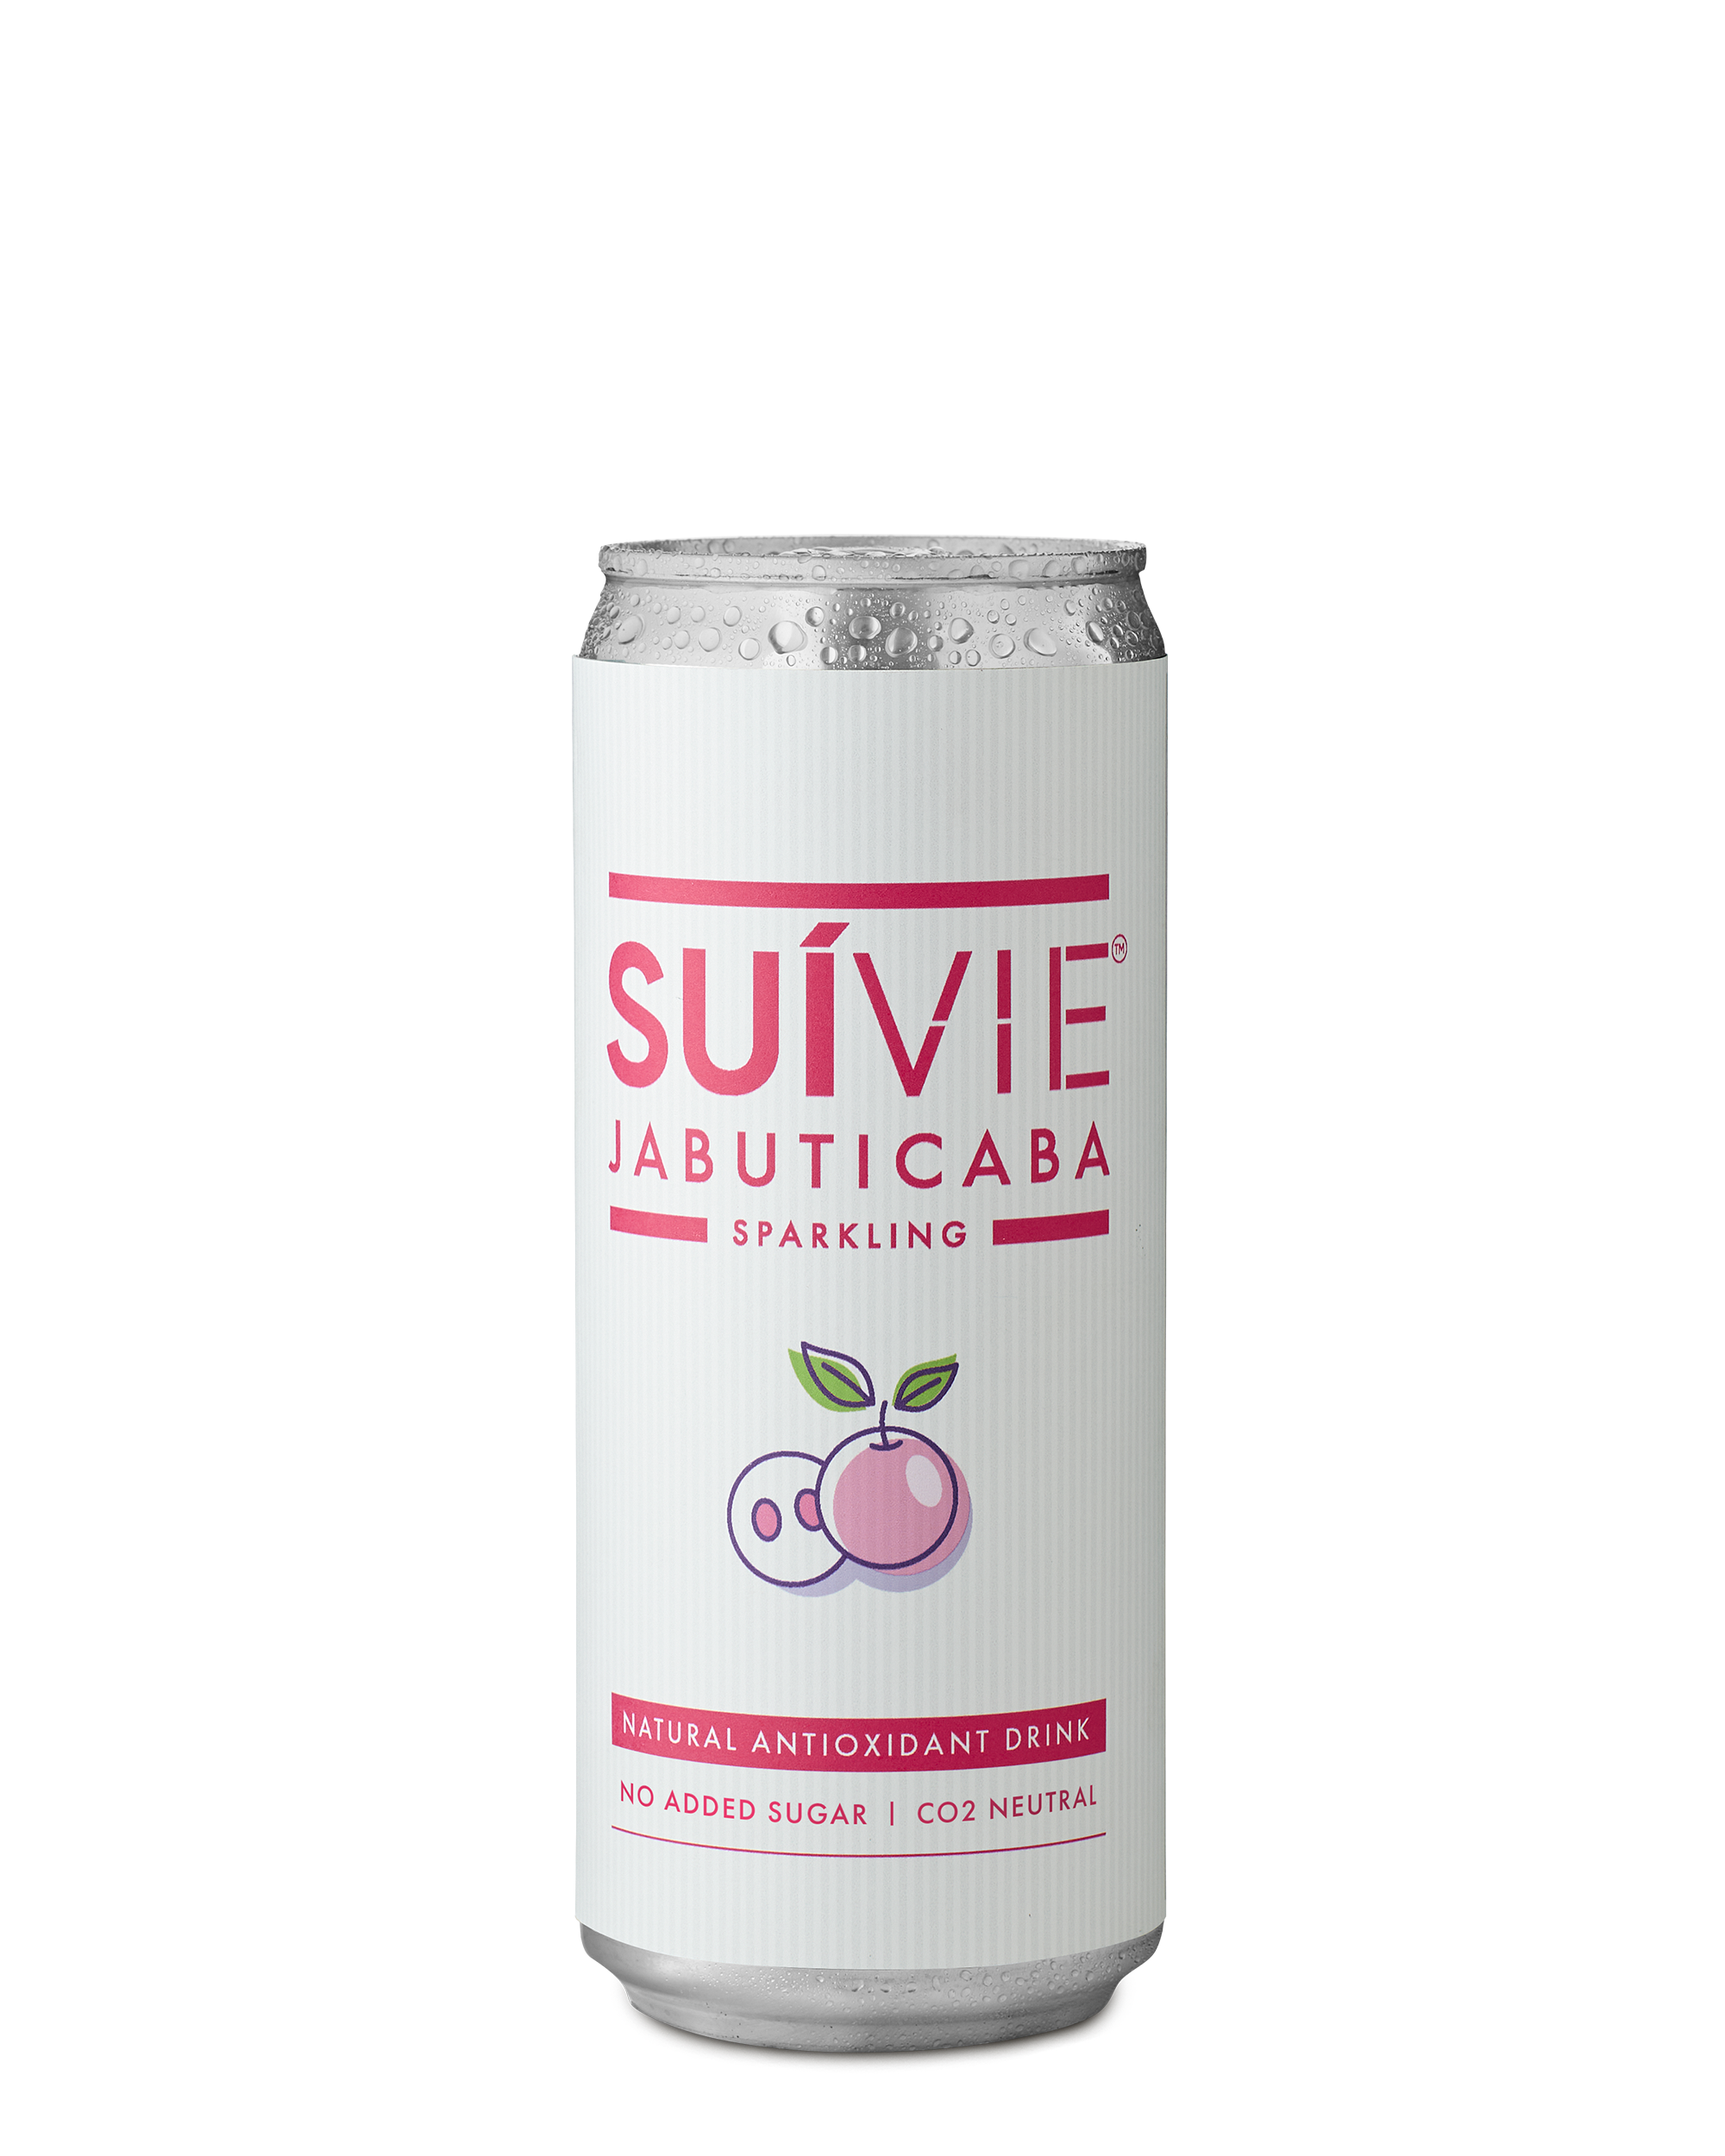 suivie-sparkling-can-newII